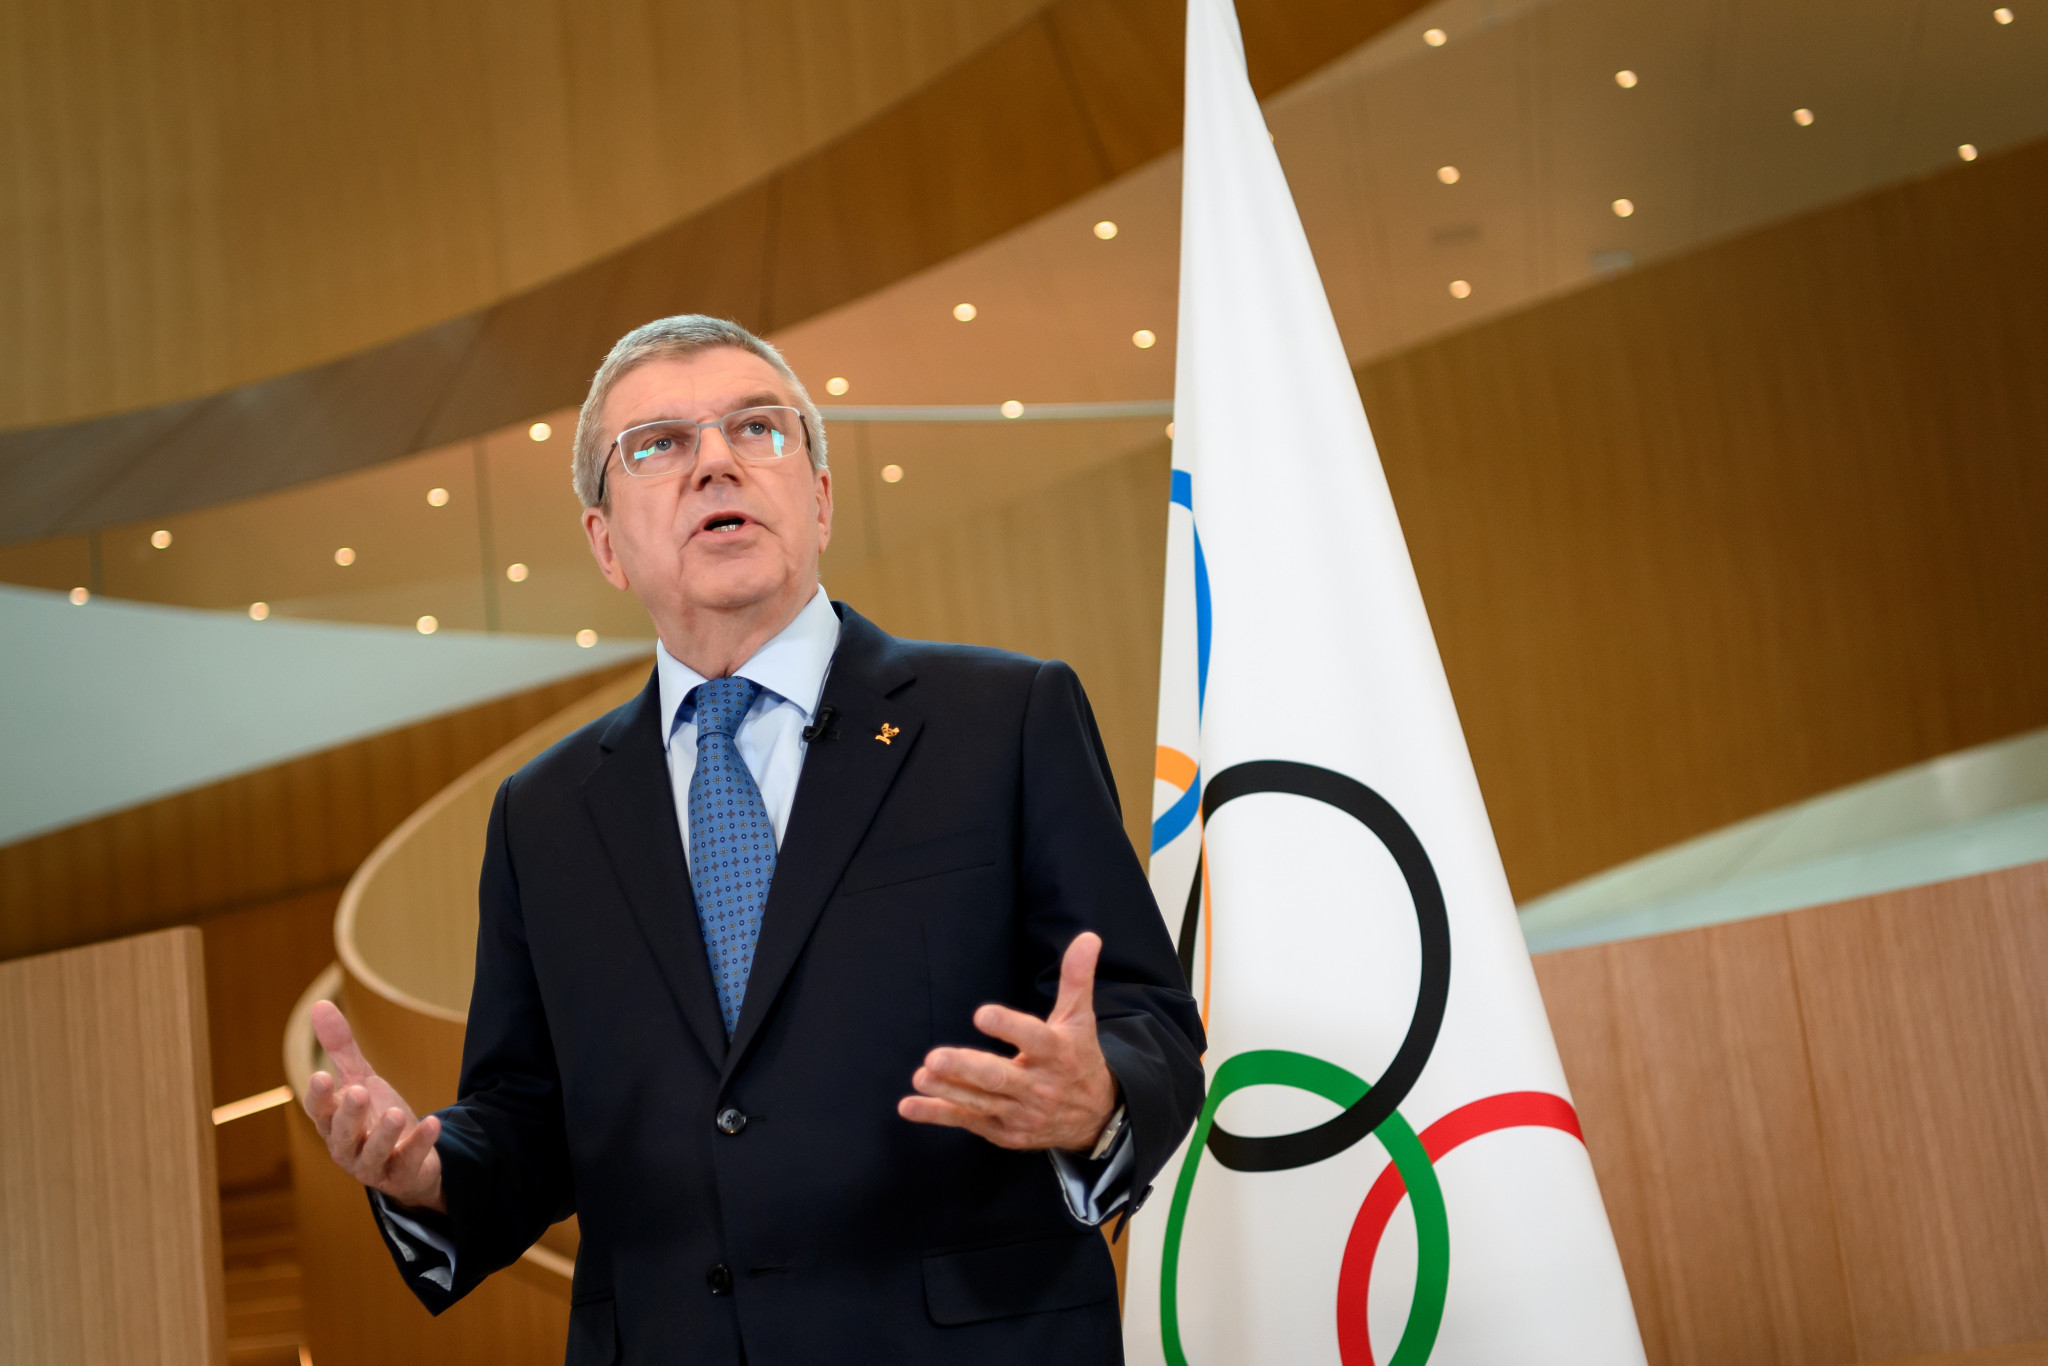 Bach calls for Olympic Movement to look into "proliferation of sports events" post-pandemic